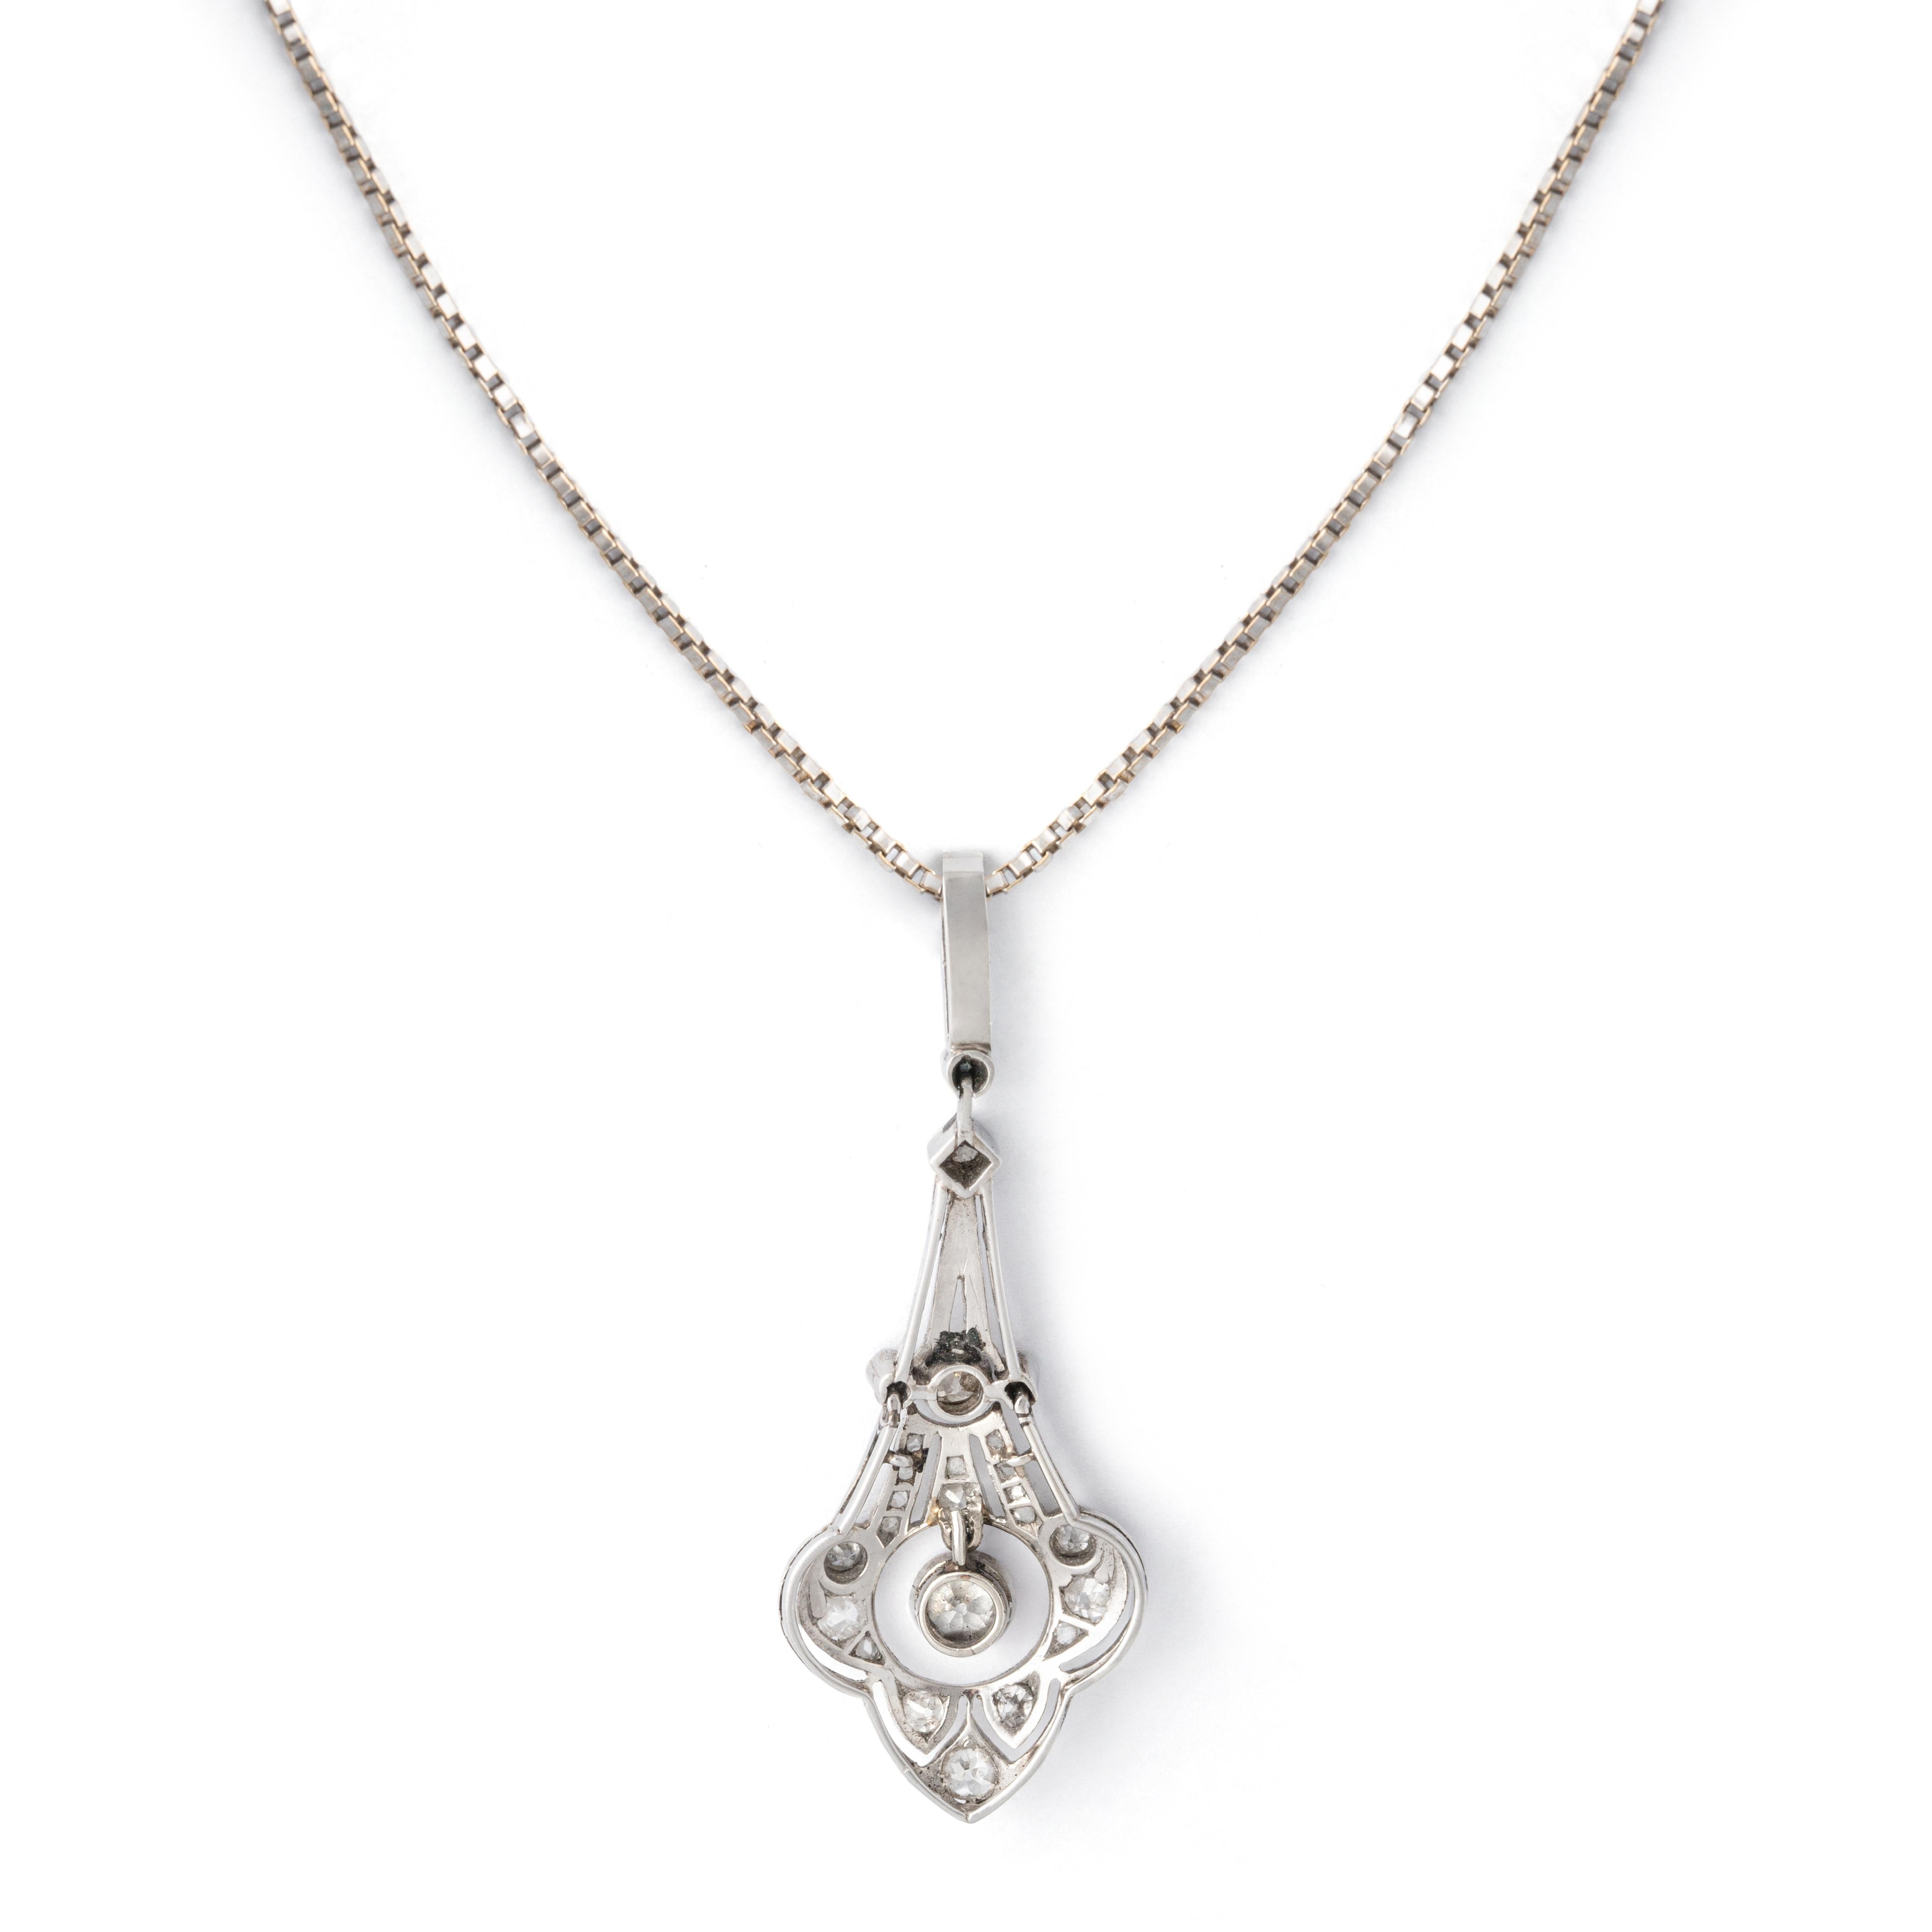 Diamond platinum and white gold pendant chain necklace. Old mine cut. 
Circa 1930.

Total weight: 6.70 centimeters.
Total length chain: approx. 43.00 centimeters.
Dimension pendant: approx. 4.10 centimeters x 1.40 centimeters.